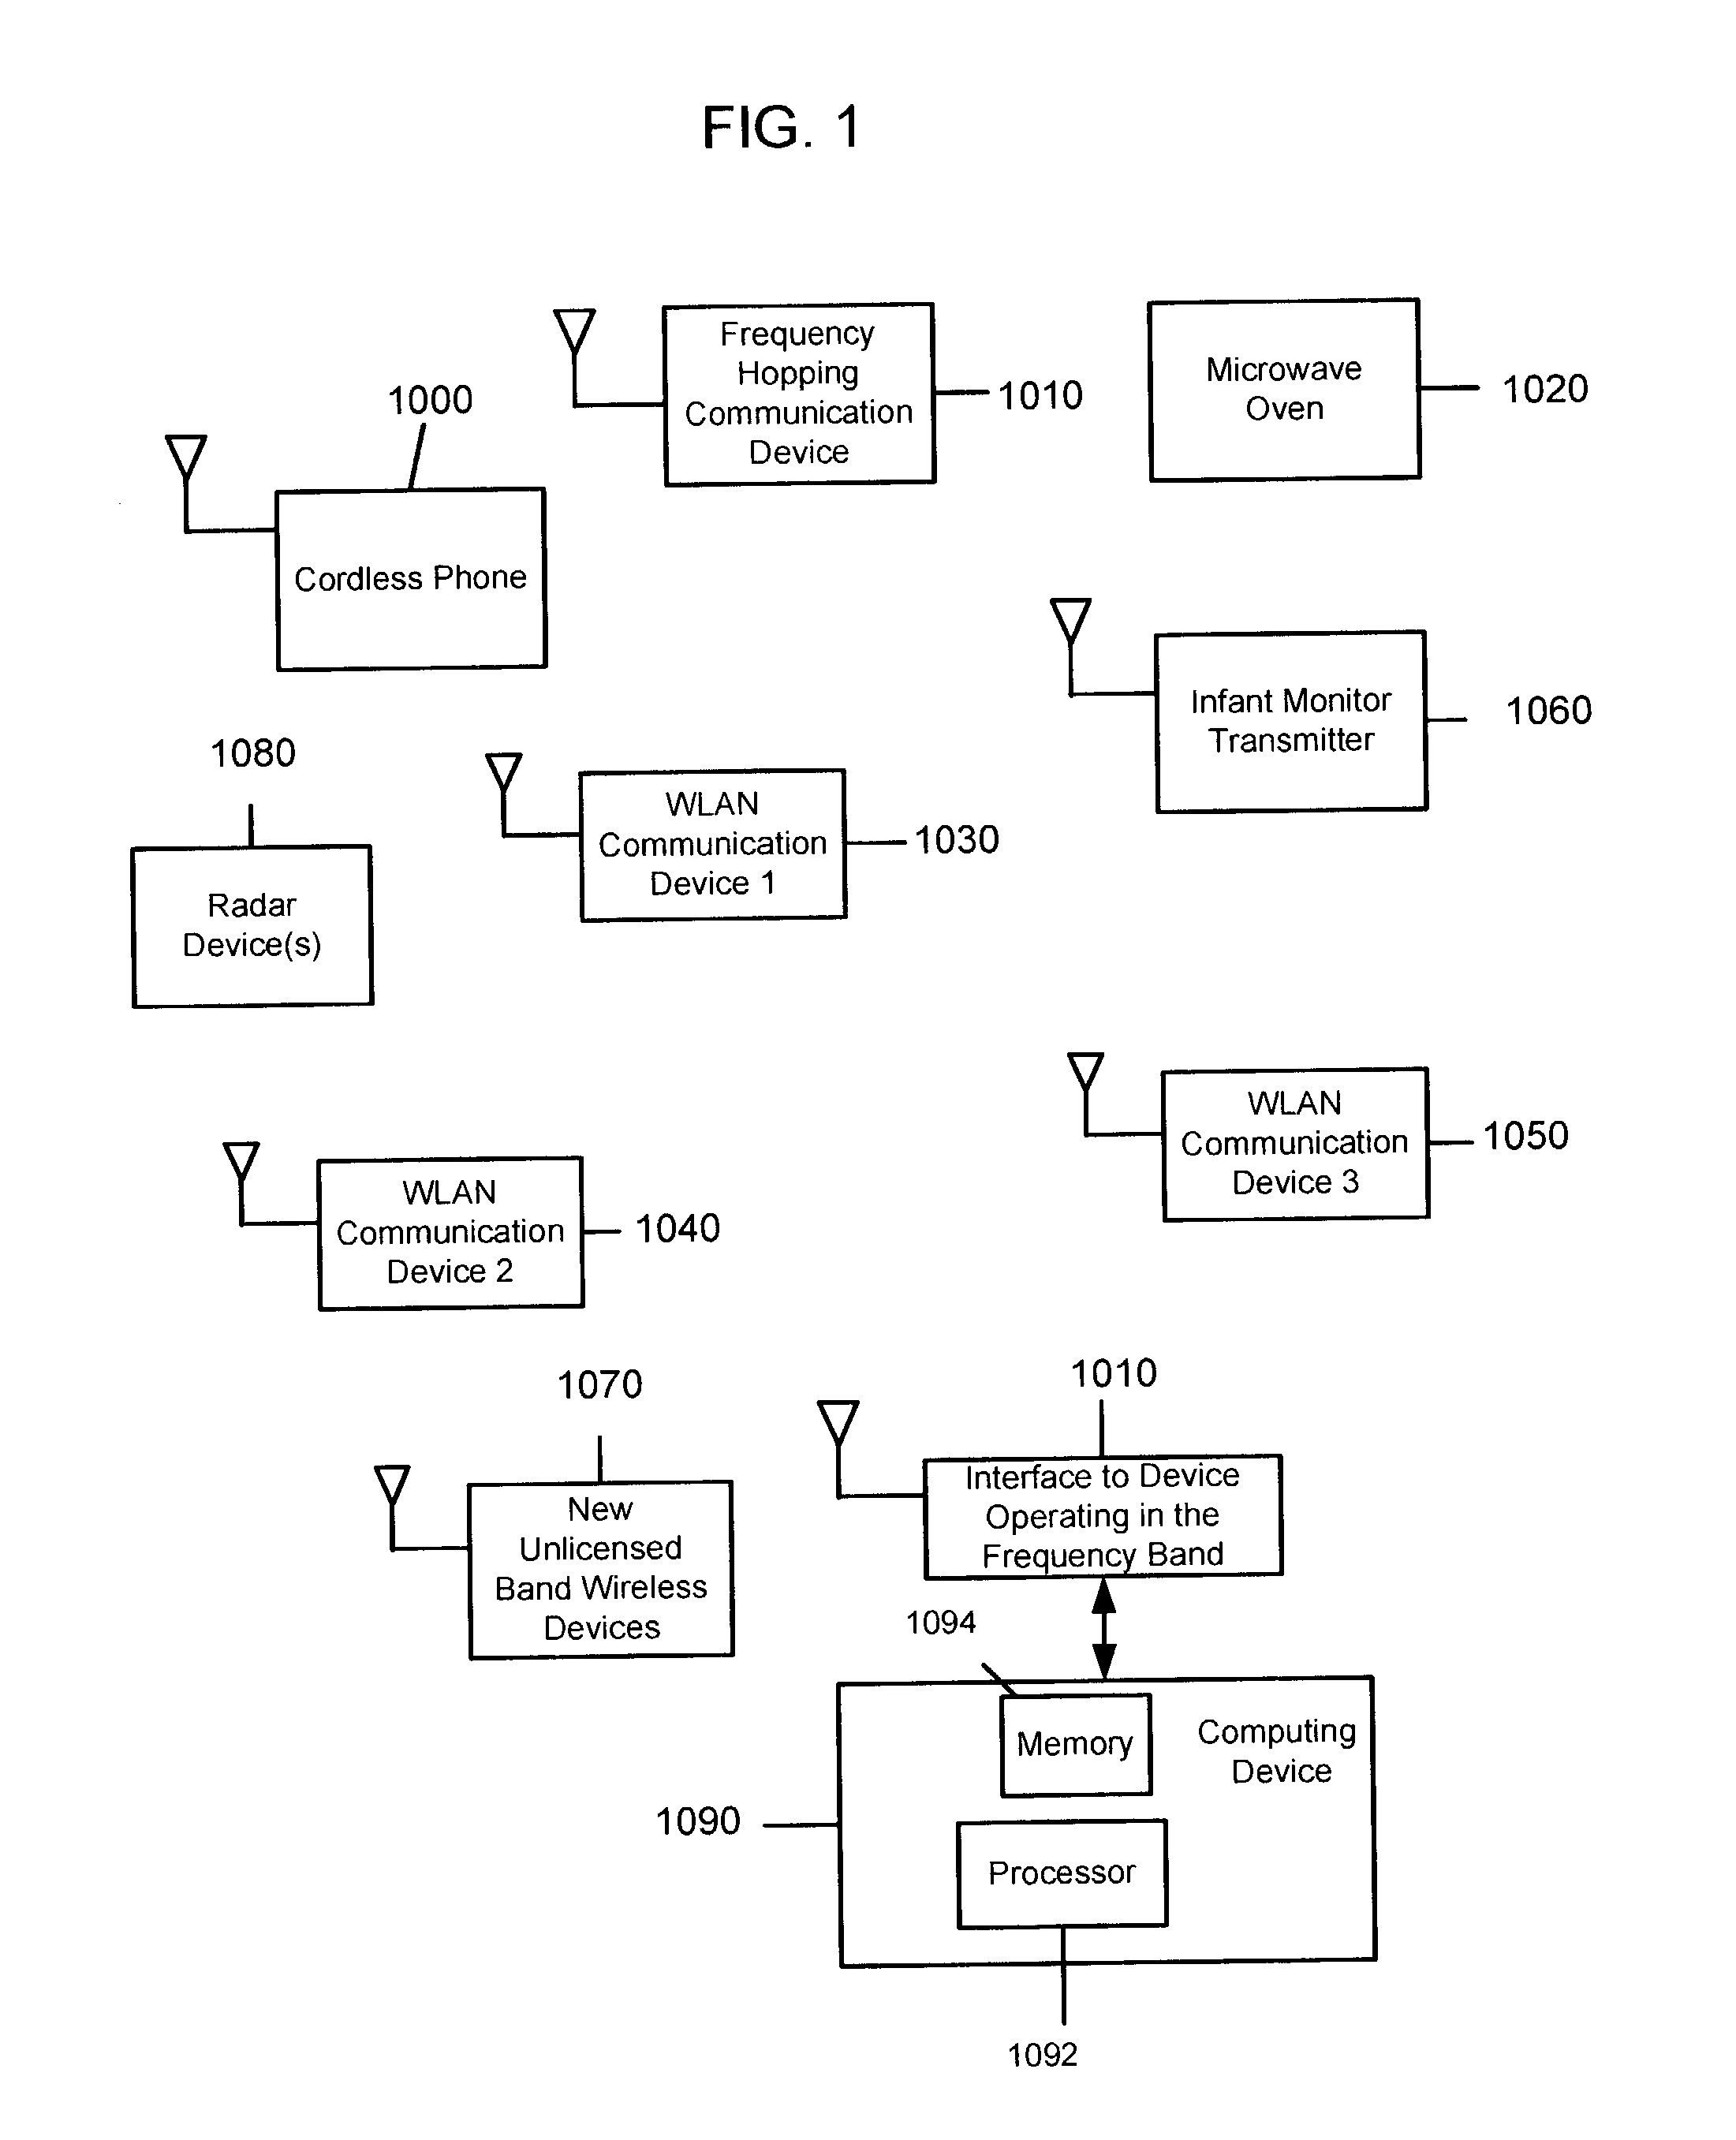 System and method for spectrum management of a shared frequency band